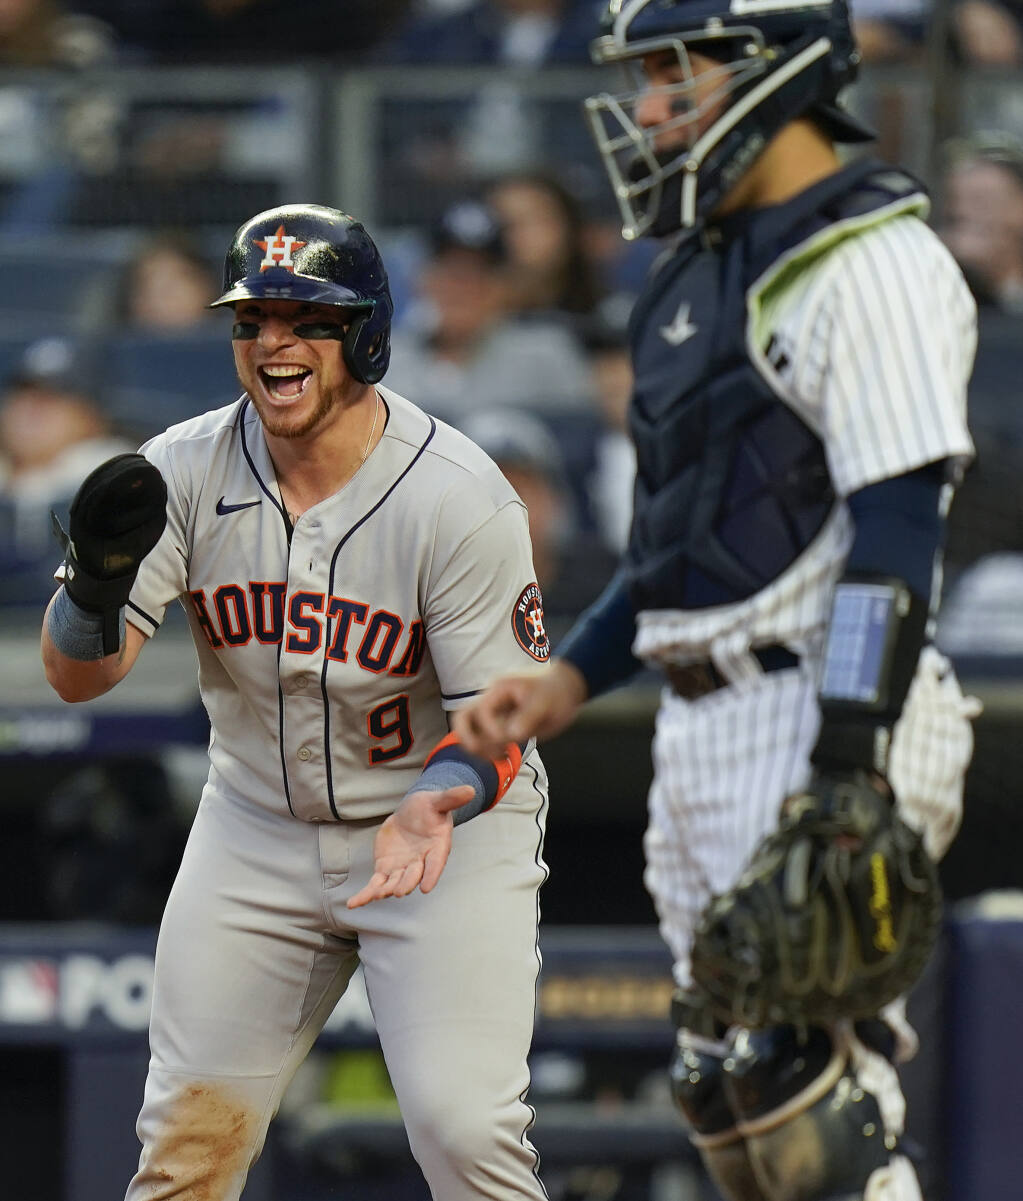 Gerrit Cole: Astros beat Yankees in Game 3 of the ALCS - Sports